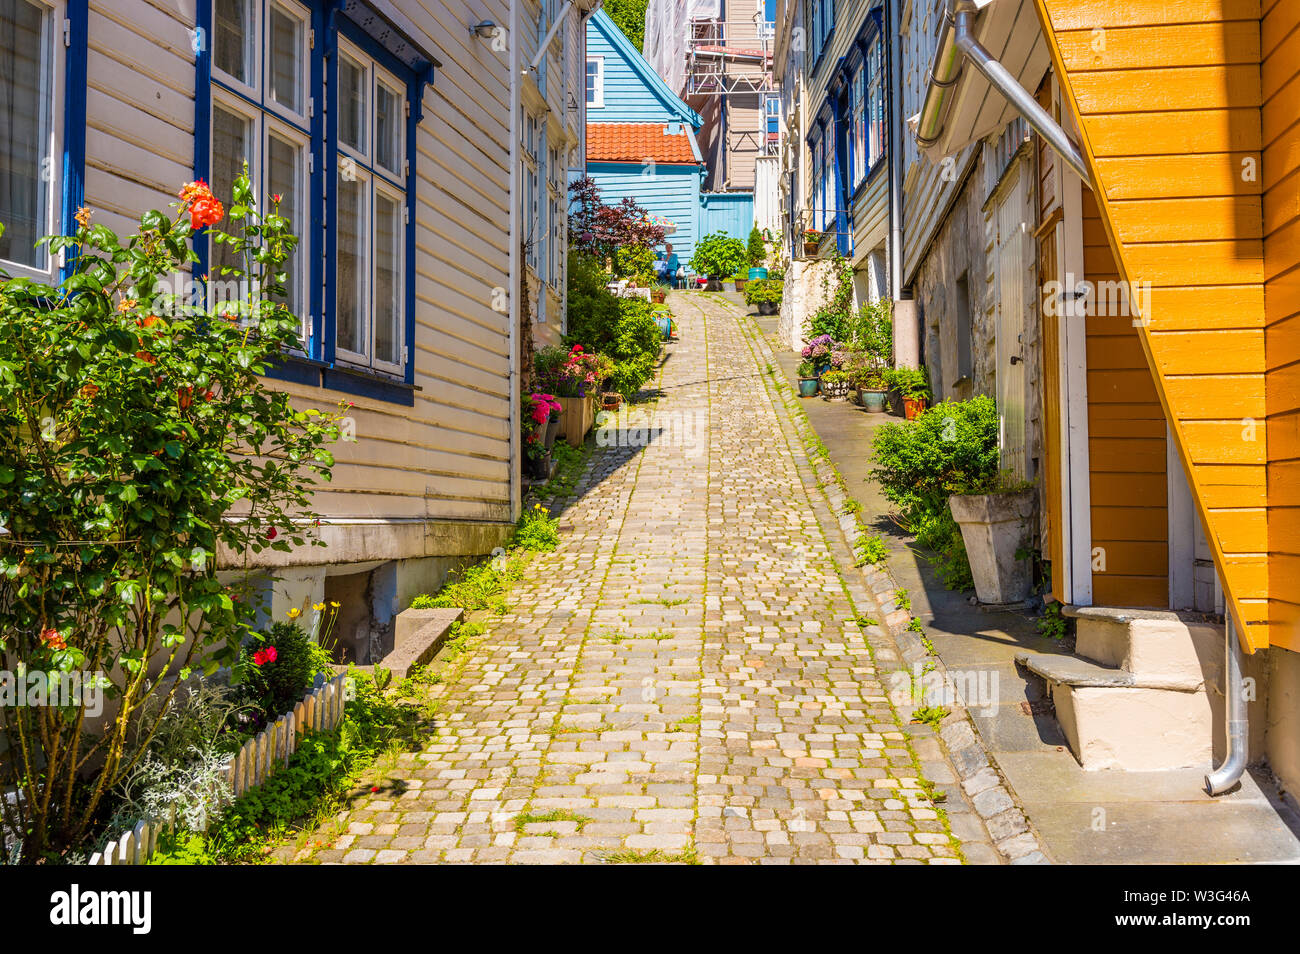 Old wooden houses and narrow streets in the pittoresk part of Bergen, Norway, called Nordnes. Stock Photo